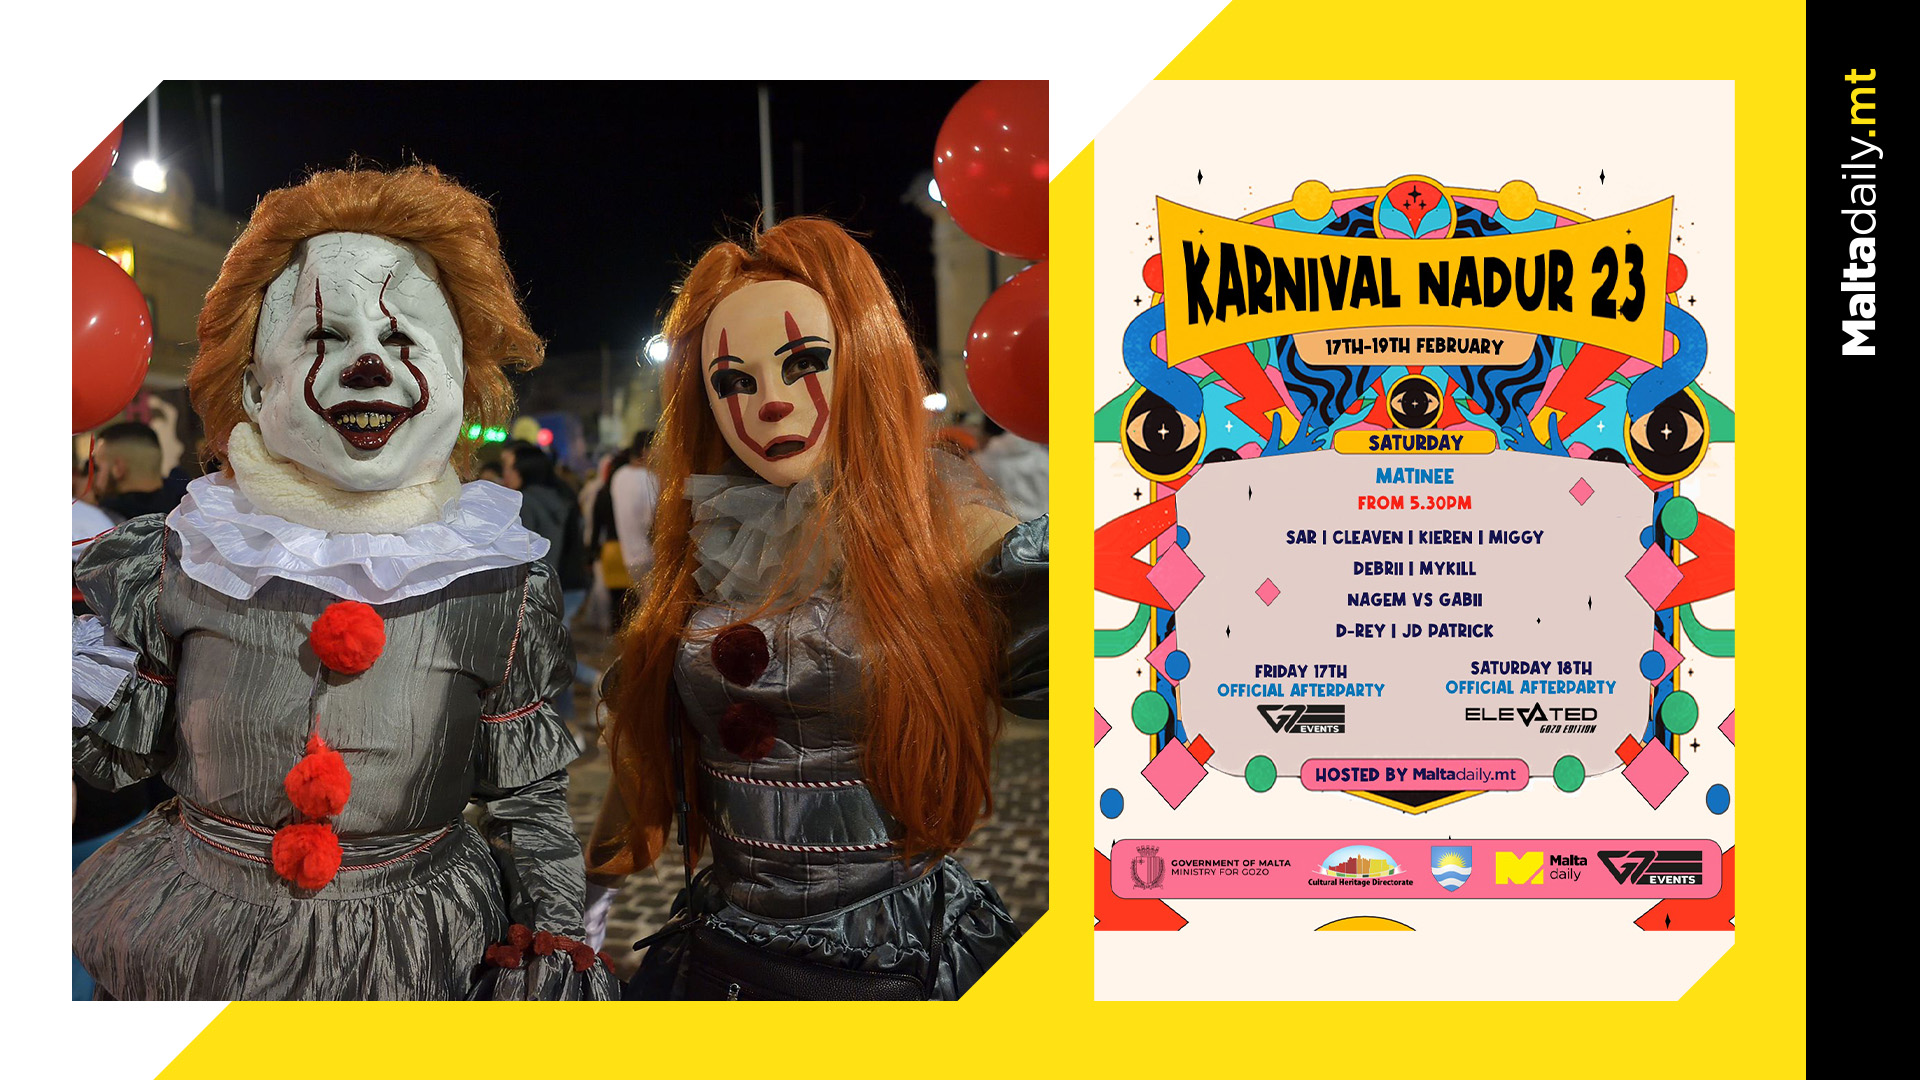 Nadur spontaneous carnival celebrations to kick off day two at 5.30PM